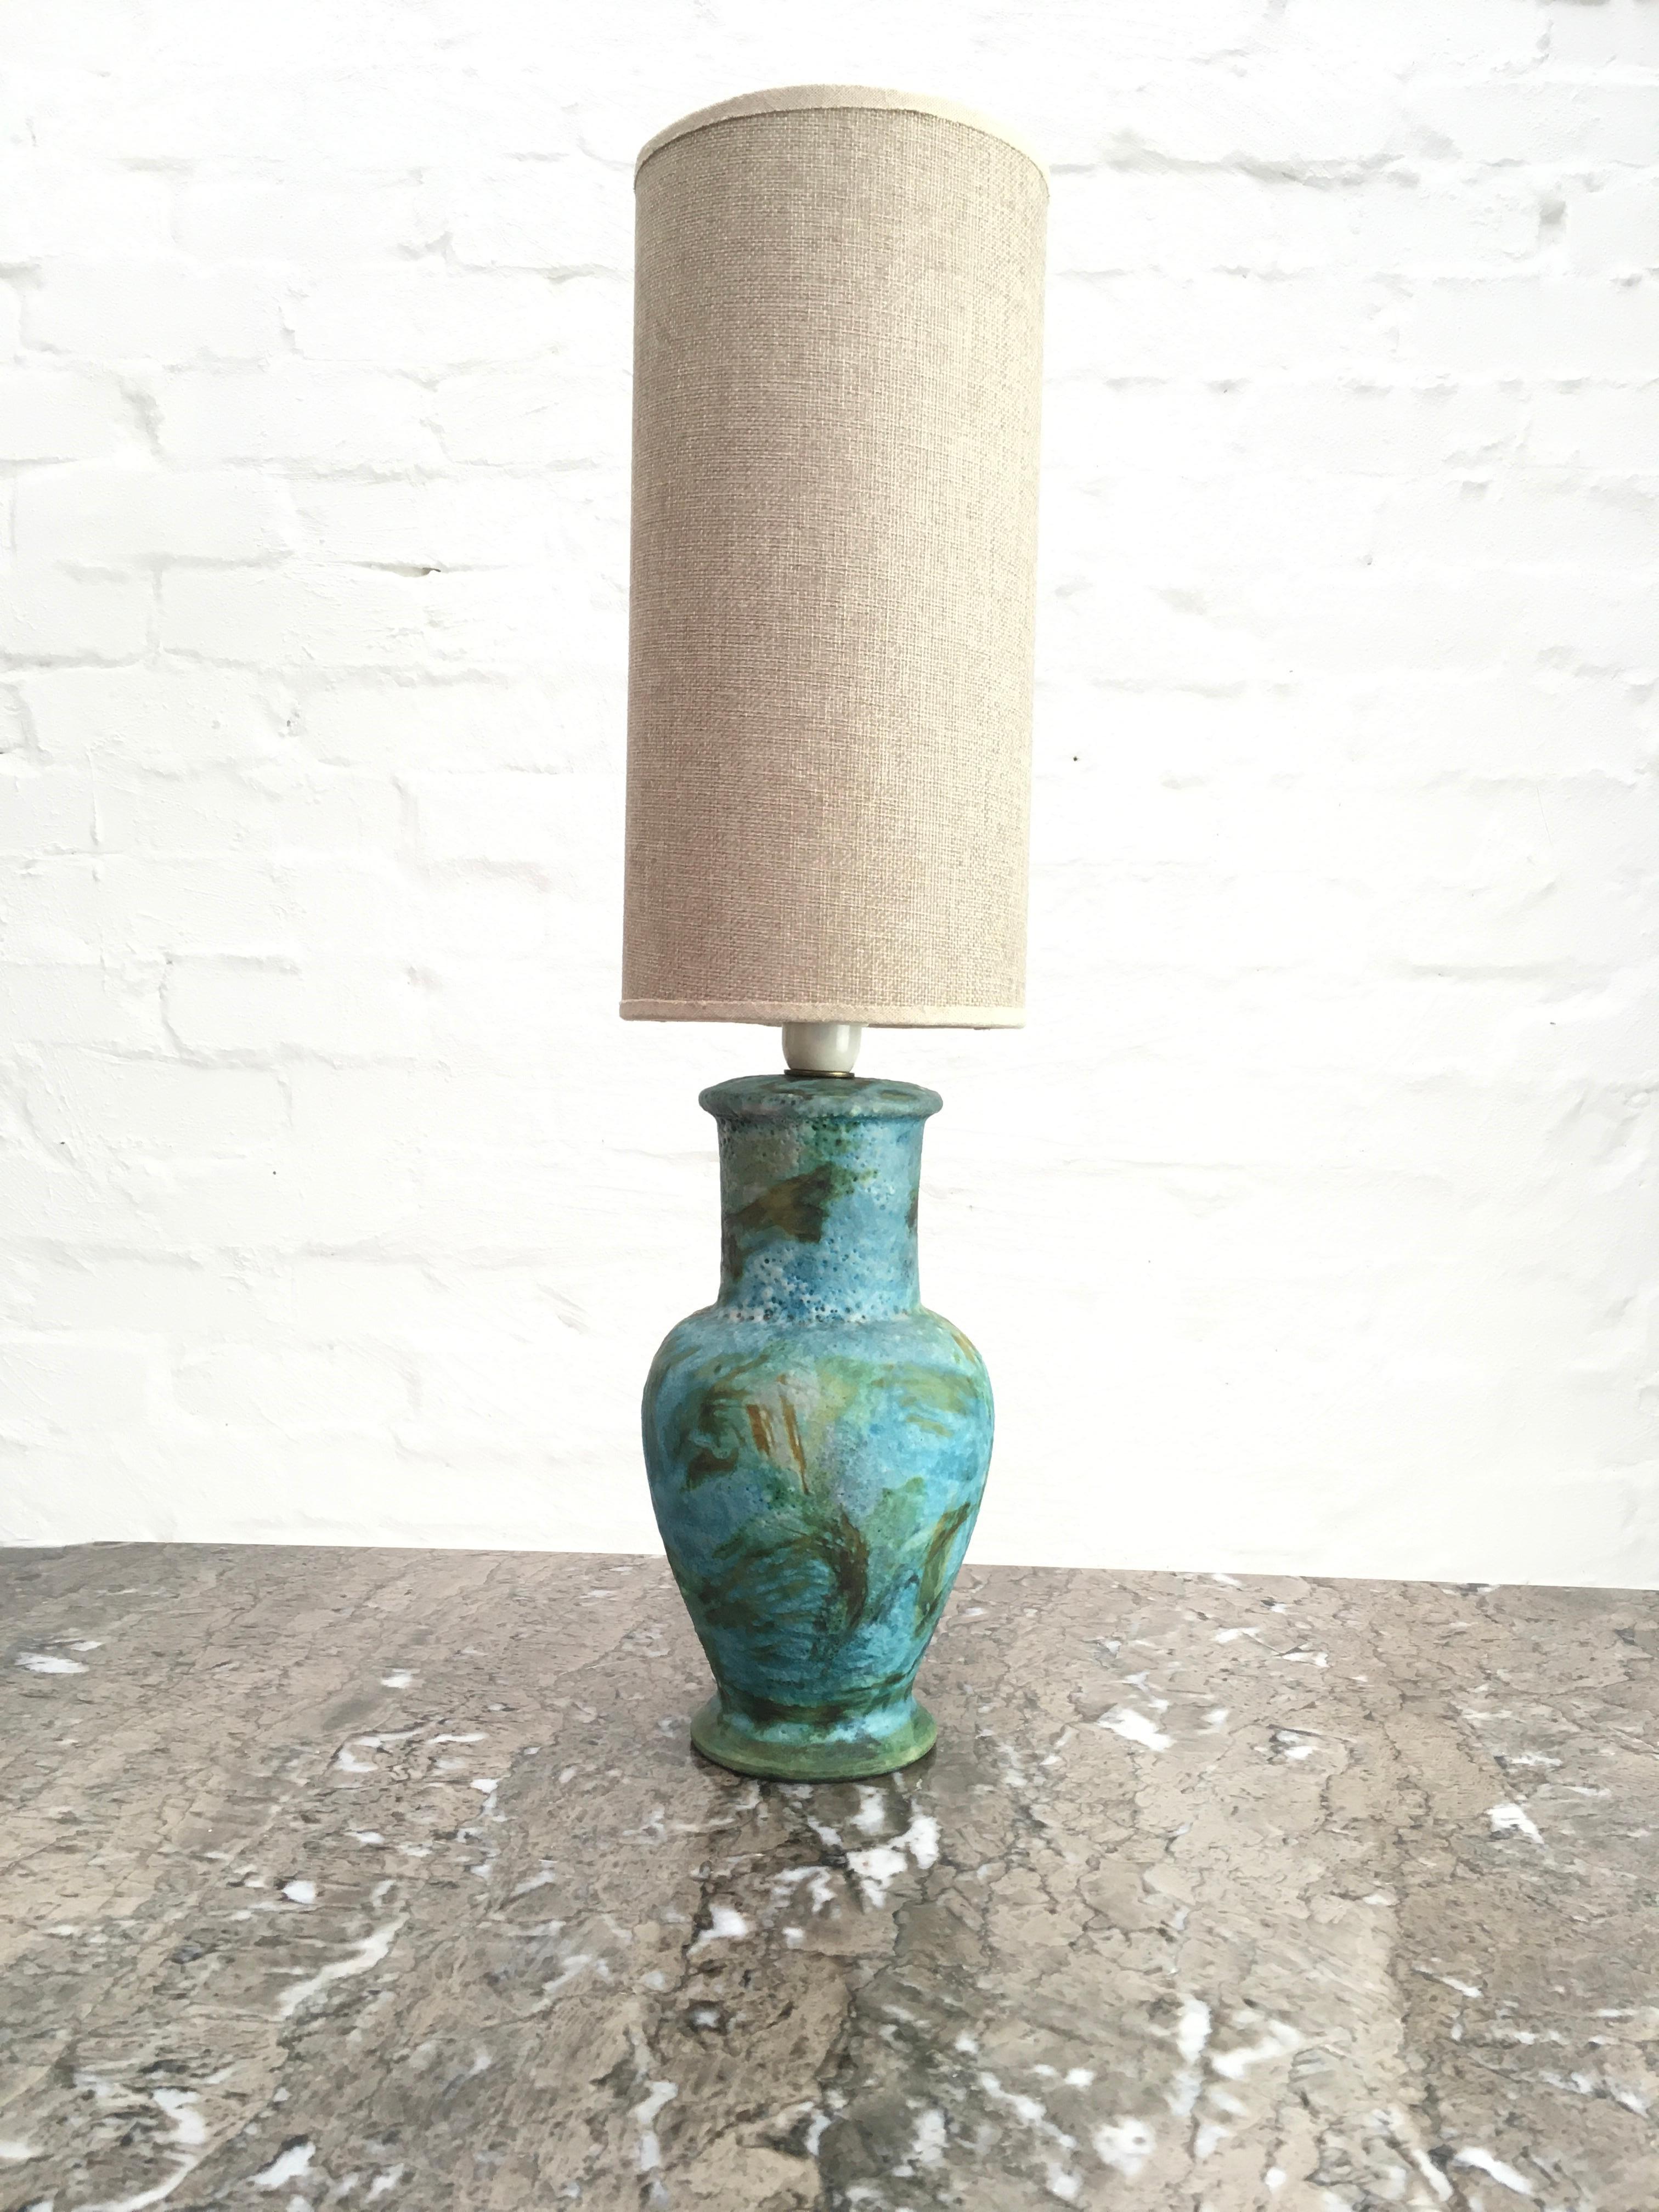 A small sea garden glazed ceramic lamp by Alvino Bagni, probably for Raymor. Comes with its own petite cylindrical custom made vintage shade in hessian.

We love this lamp in an intimate corner, perhaps on a cocktail trolley or side table. It has